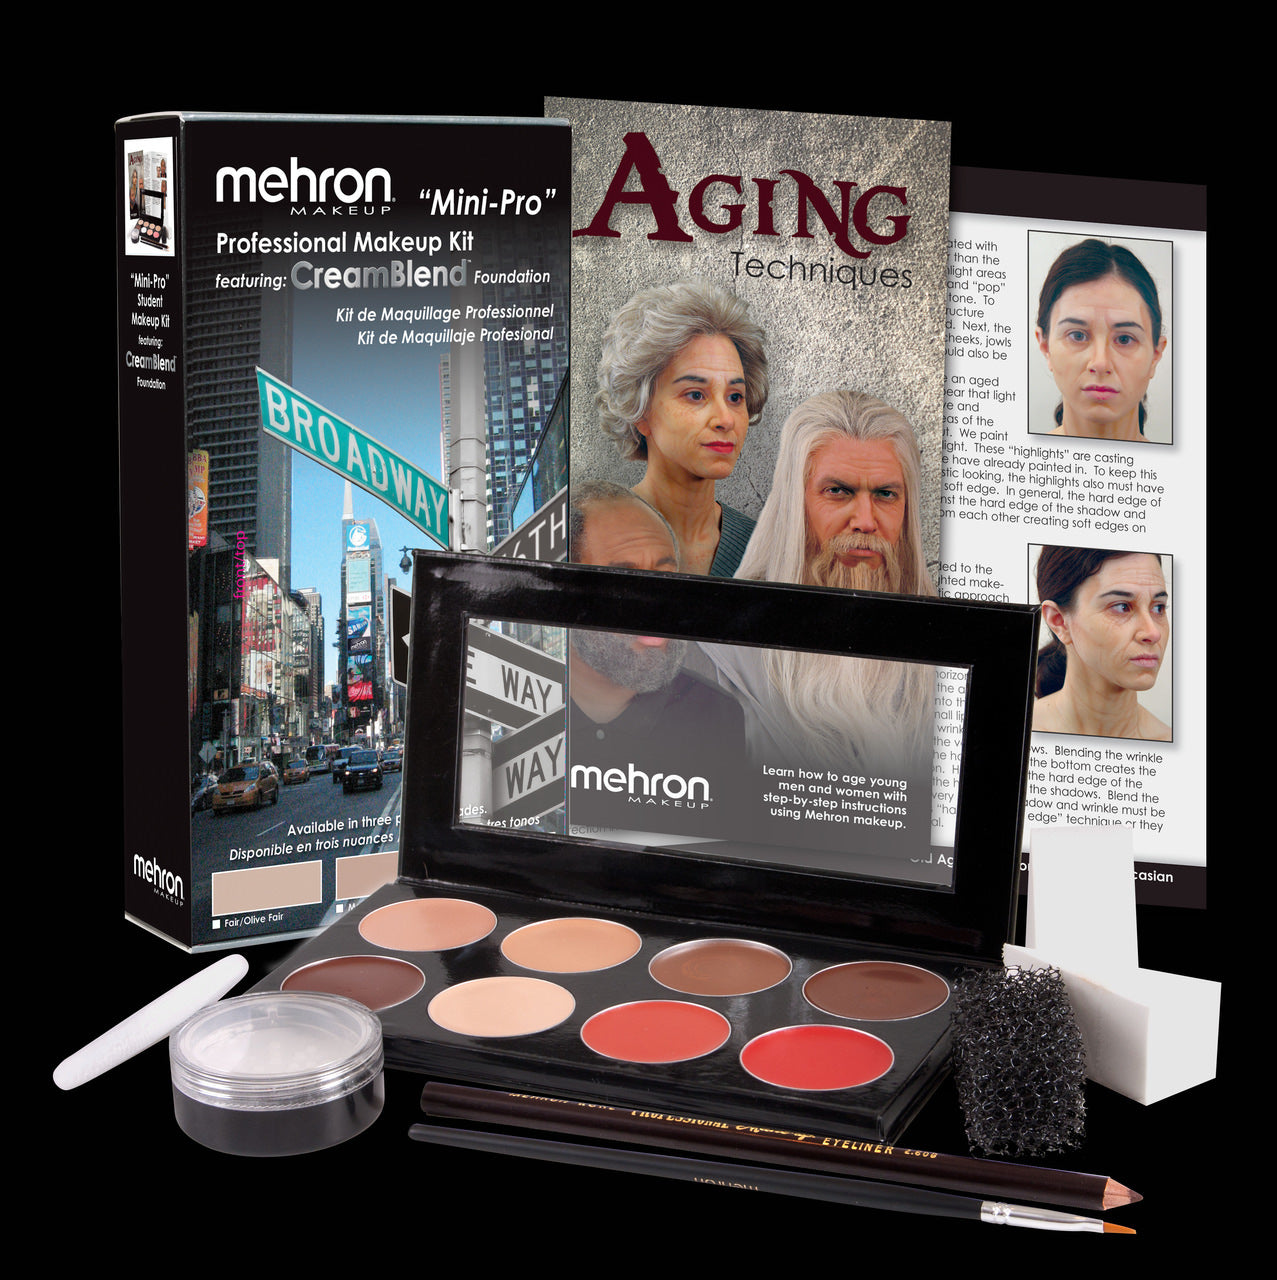  Ben Nye Theatrical Creme Personal Kit - OLIVE : LIGHT MEDIUM  PK-3 : Makeup Sets : Beauty & Personal Care